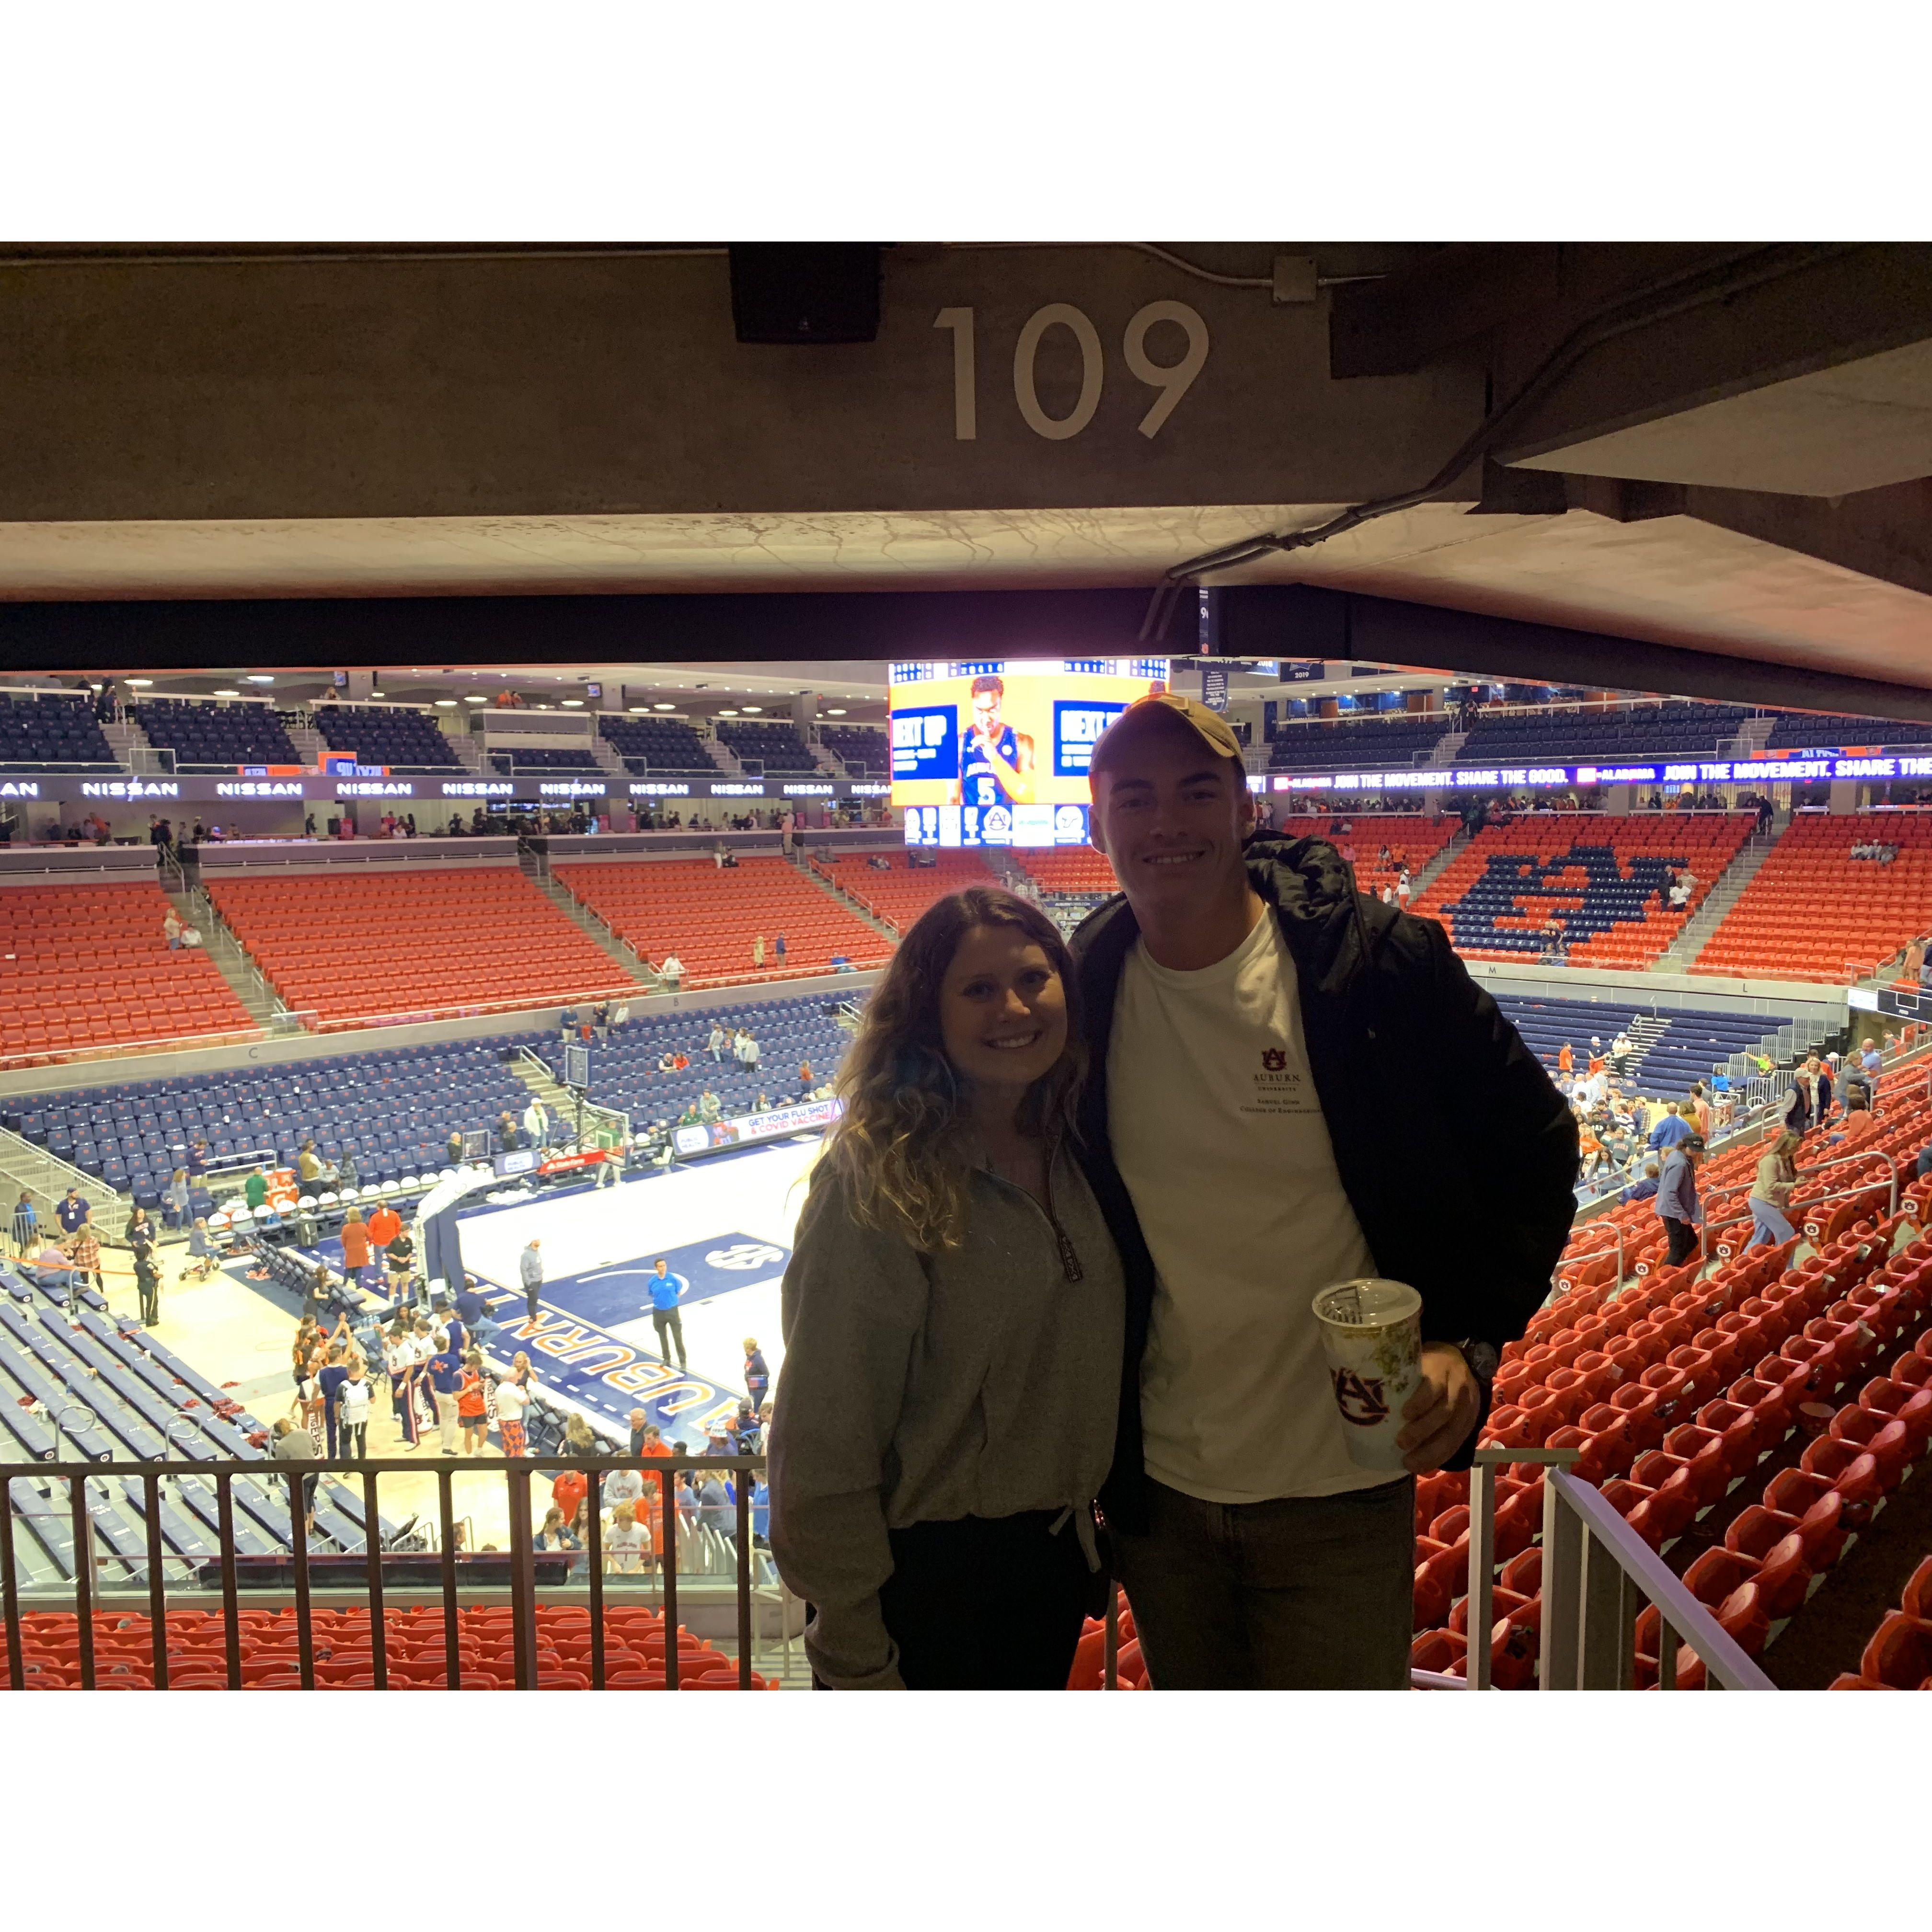 Our first Auburn basketball game together!